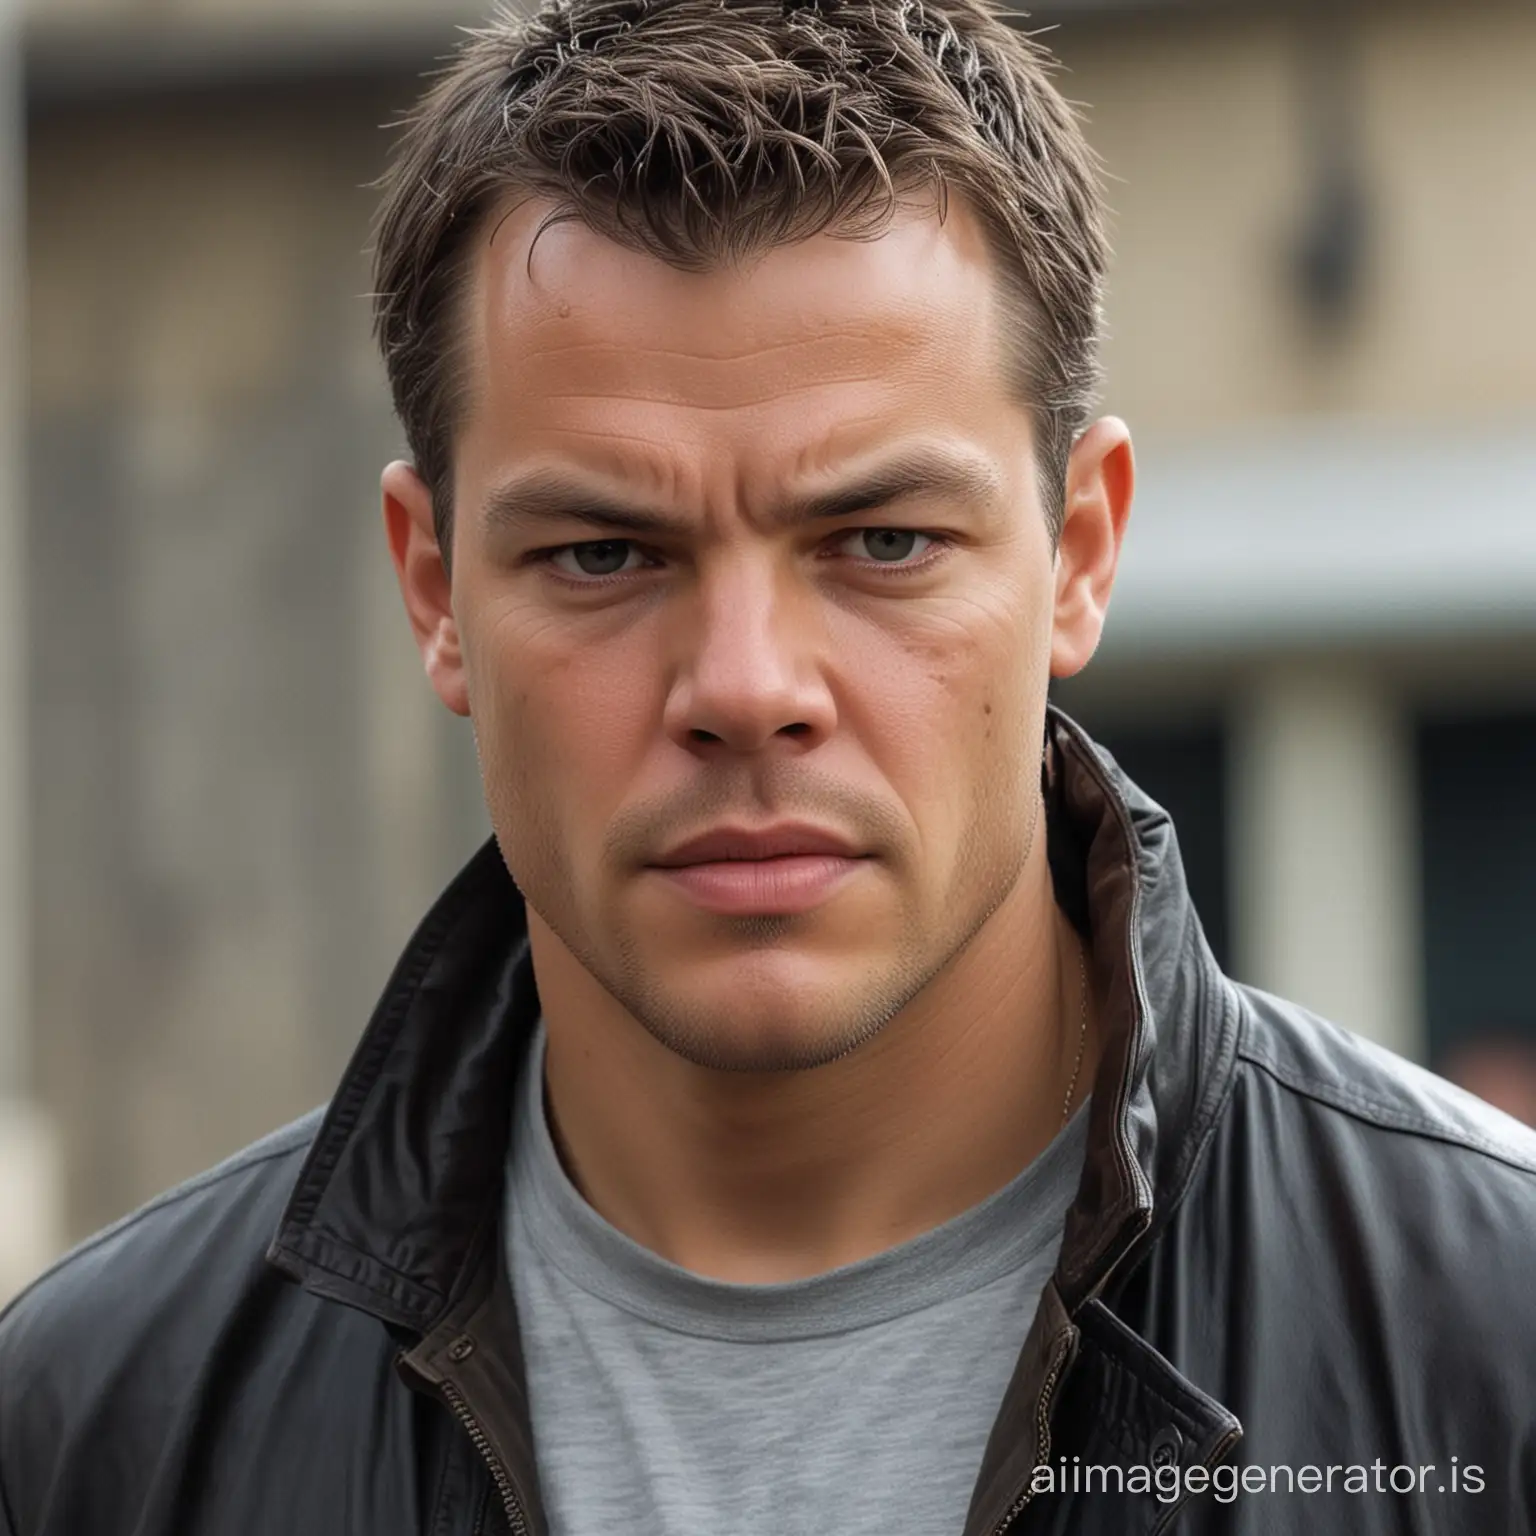 
In Robert Ludlum's "The Bourne Identity," Jason Bourne is depicted as a man shrouded in mystery, with an appearance that reflects his elusive and enigmatic nature. Physically, Bourne is described as having a compact and athletic build, suggesting both strength and agility. His hair is dark and closely cropped, framing a face characterized by sharp, angular features and intense, piercing eyes that seem to hold a hidden depth of knowledge and experience.

Bourne's attire is functional and unassuming, reflecting his background as a covert operative. He typically dresses in nondescript clothing that allows him to blend seamlessly into his surroundings, favoring practical garments such as dark trousers, a plain shirt, and a weathered leather jacket. Despite his understated appearance, there is an undeniable sense of danger and unpredictability to Bourne, a silent threat lurking beneath the surface.

Throughout "The Bourne Identity," Bourne's appearance undergoes subtle changes as he grapples with fragmented memories and a past that remains elusive. His physicality becomes a key element of his identity, a reflection of the internal conflict raging within him as he seeks to uncover the truth about his own existence. As the story unfolds, Bourne's appearance serves as a visual representation of his journey of self-discovery and redemption, adding depth and complexity to his character.